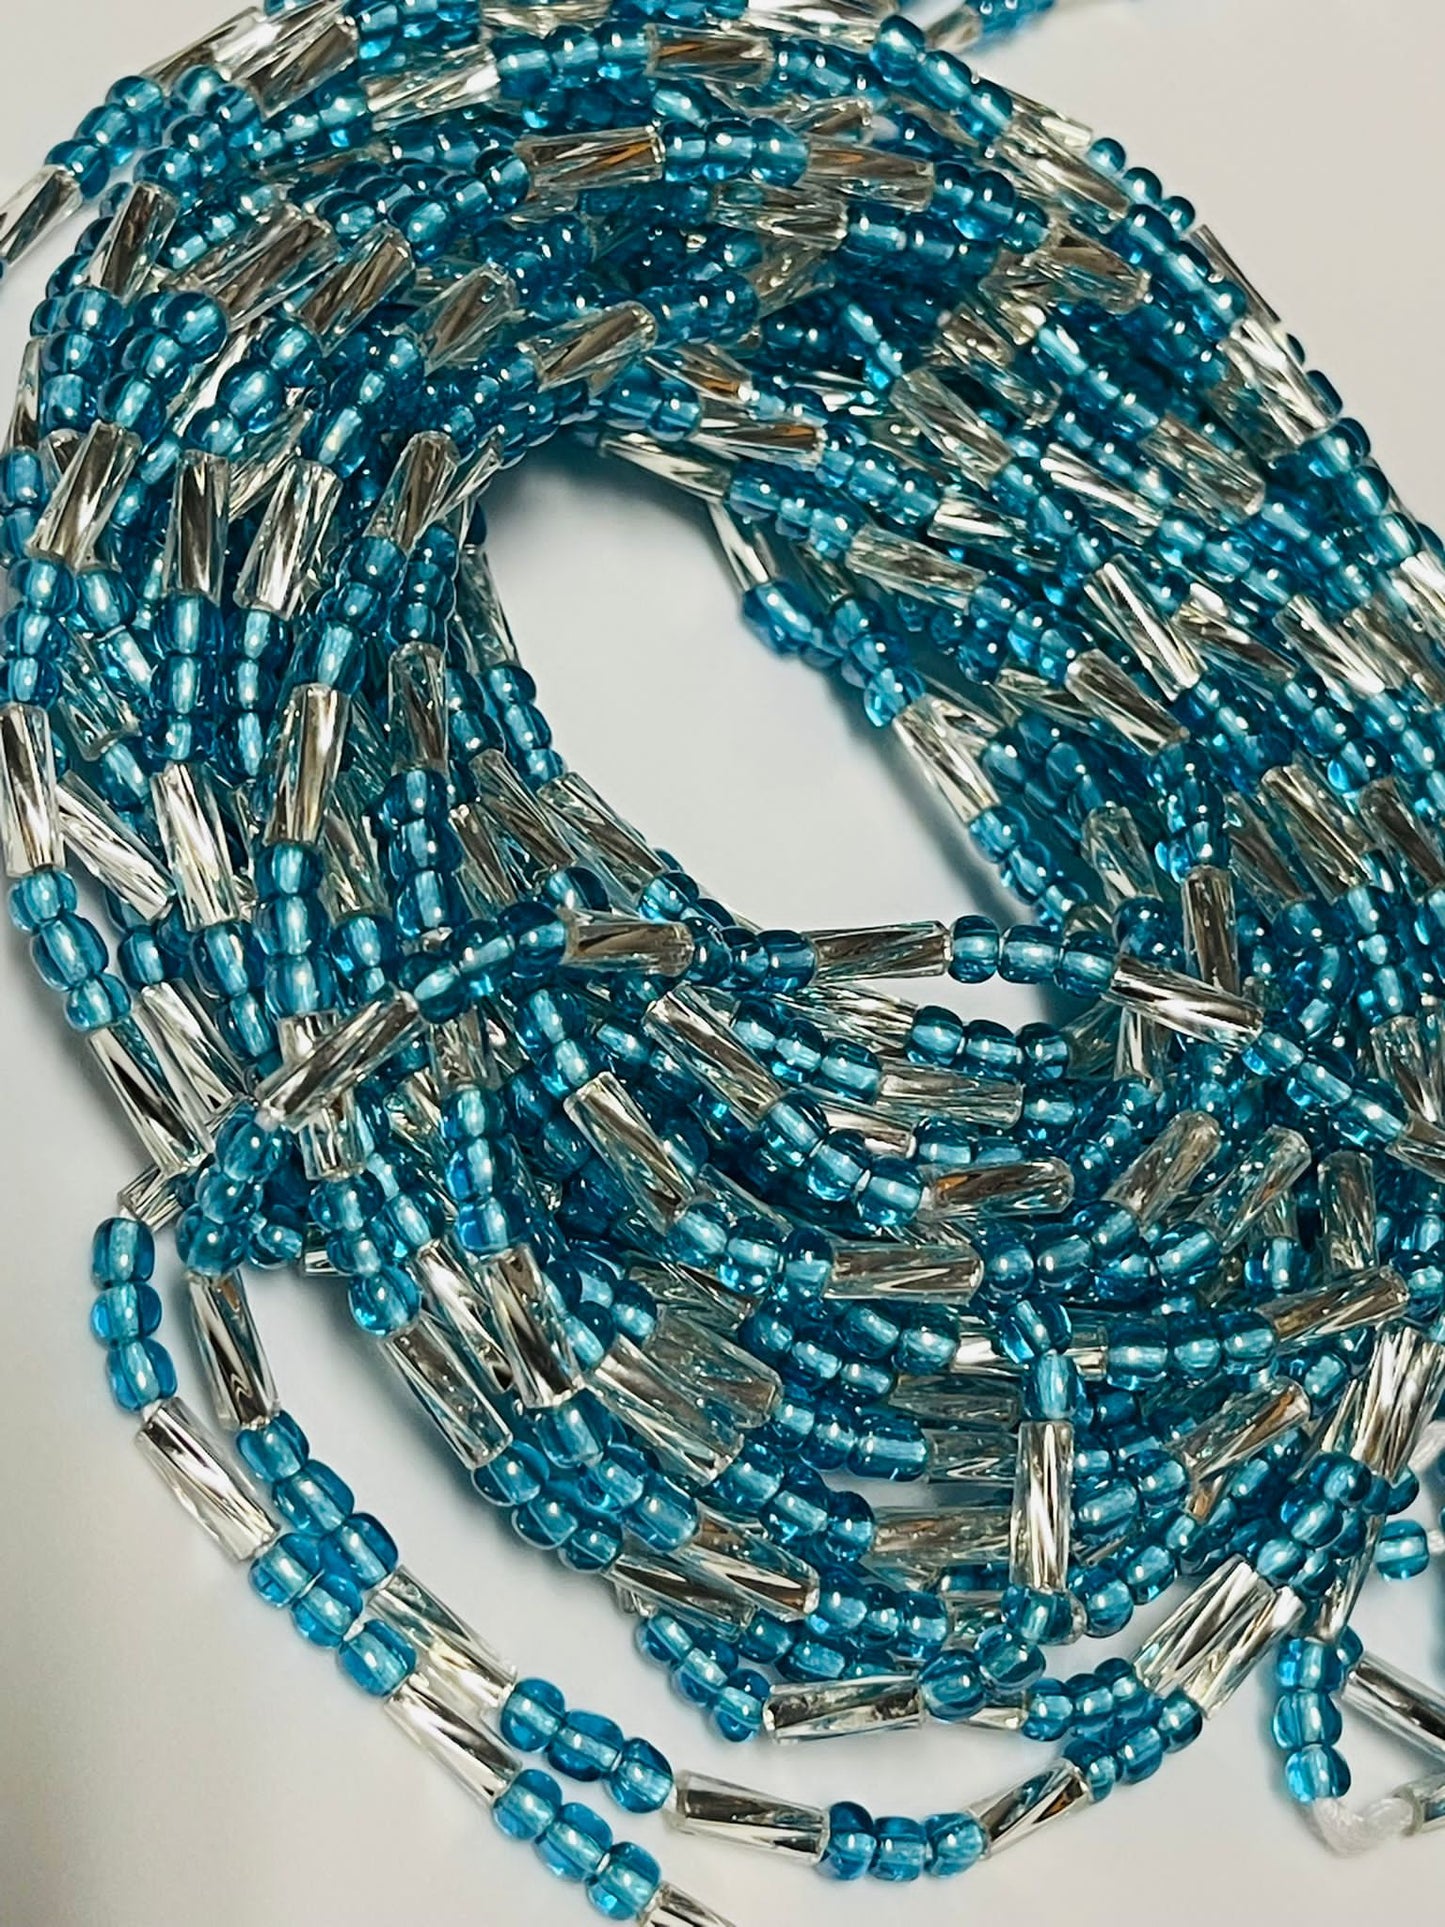 Beads with Bars(Tie on )